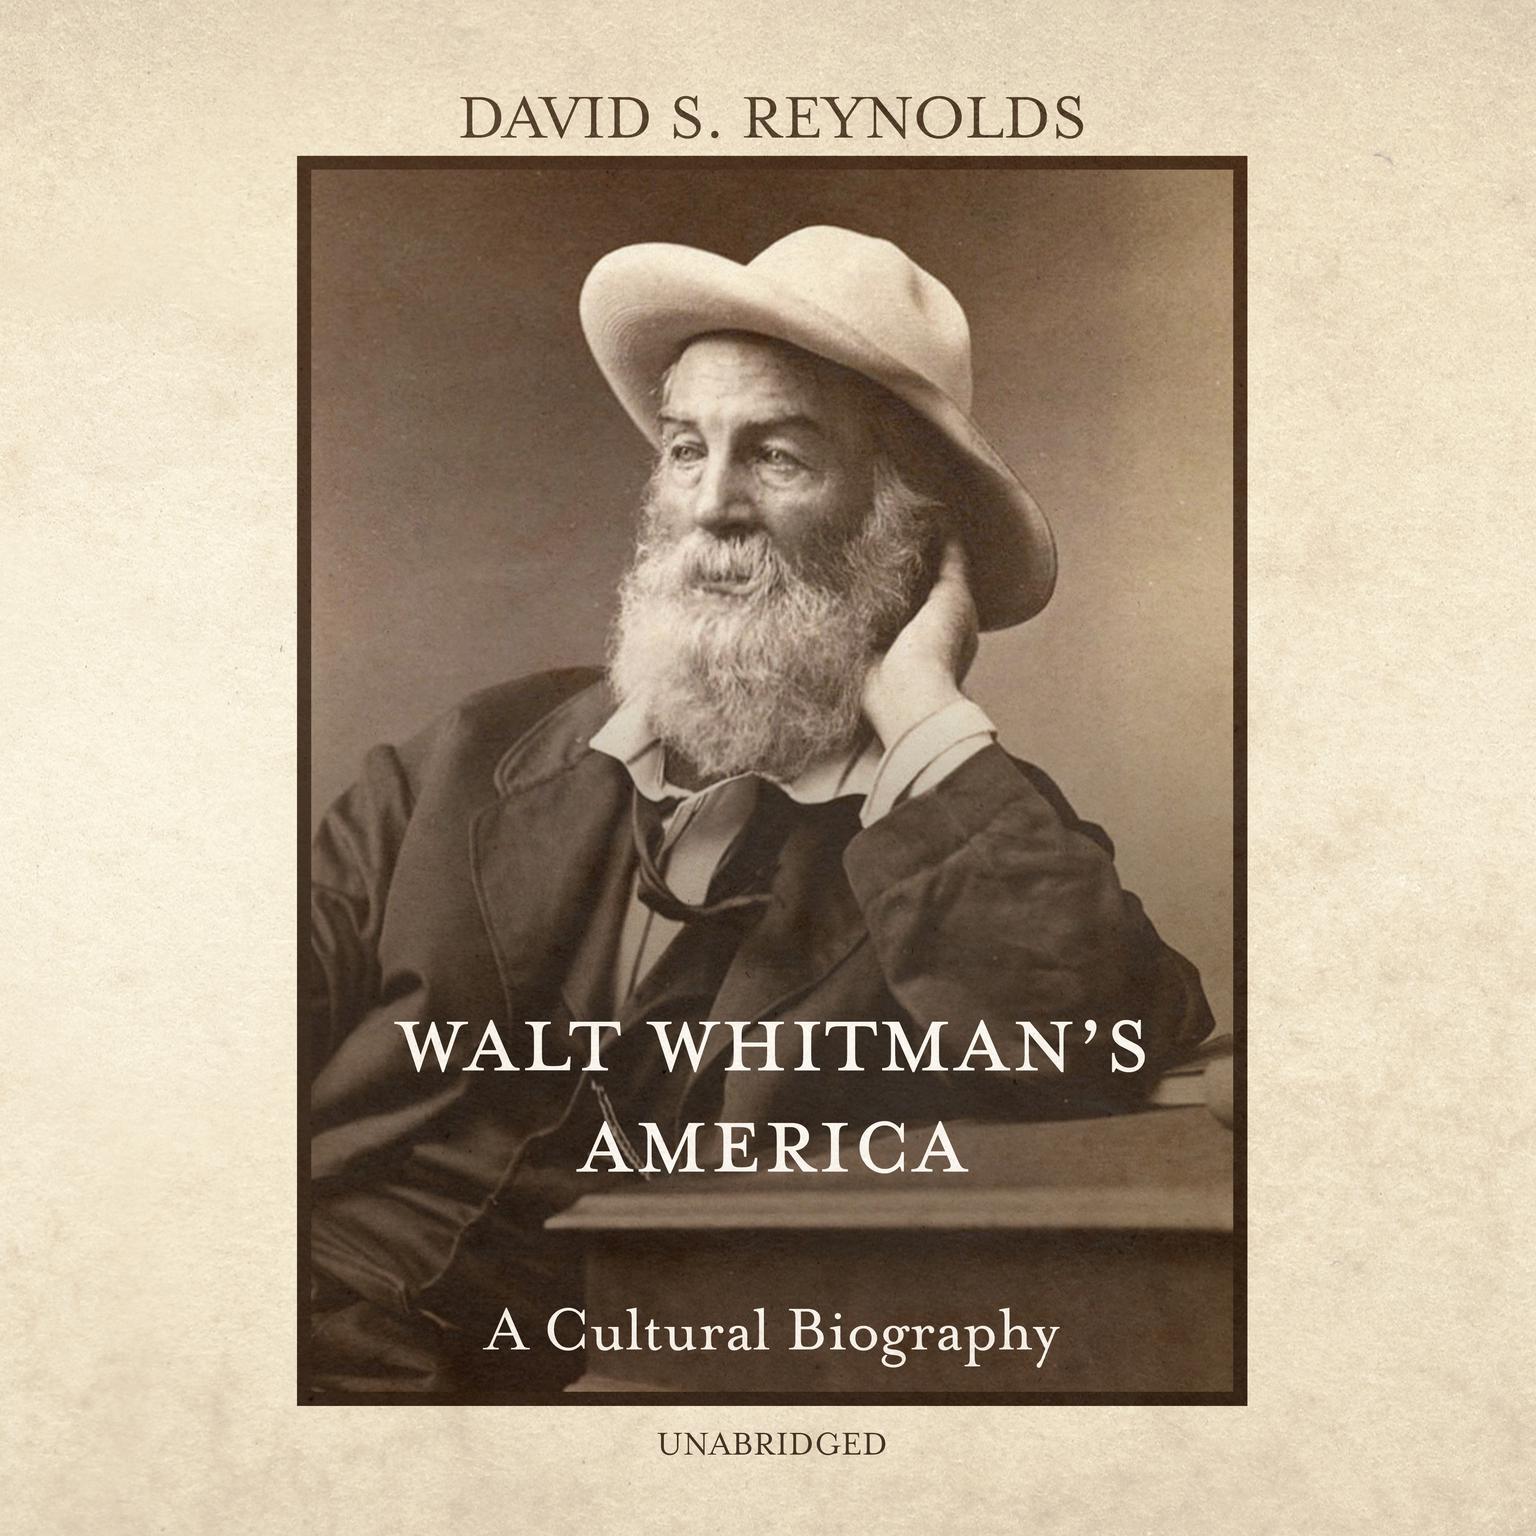 Walt Whitman’s America: A Cultural Biography Audiobook, by David S. Reynolds